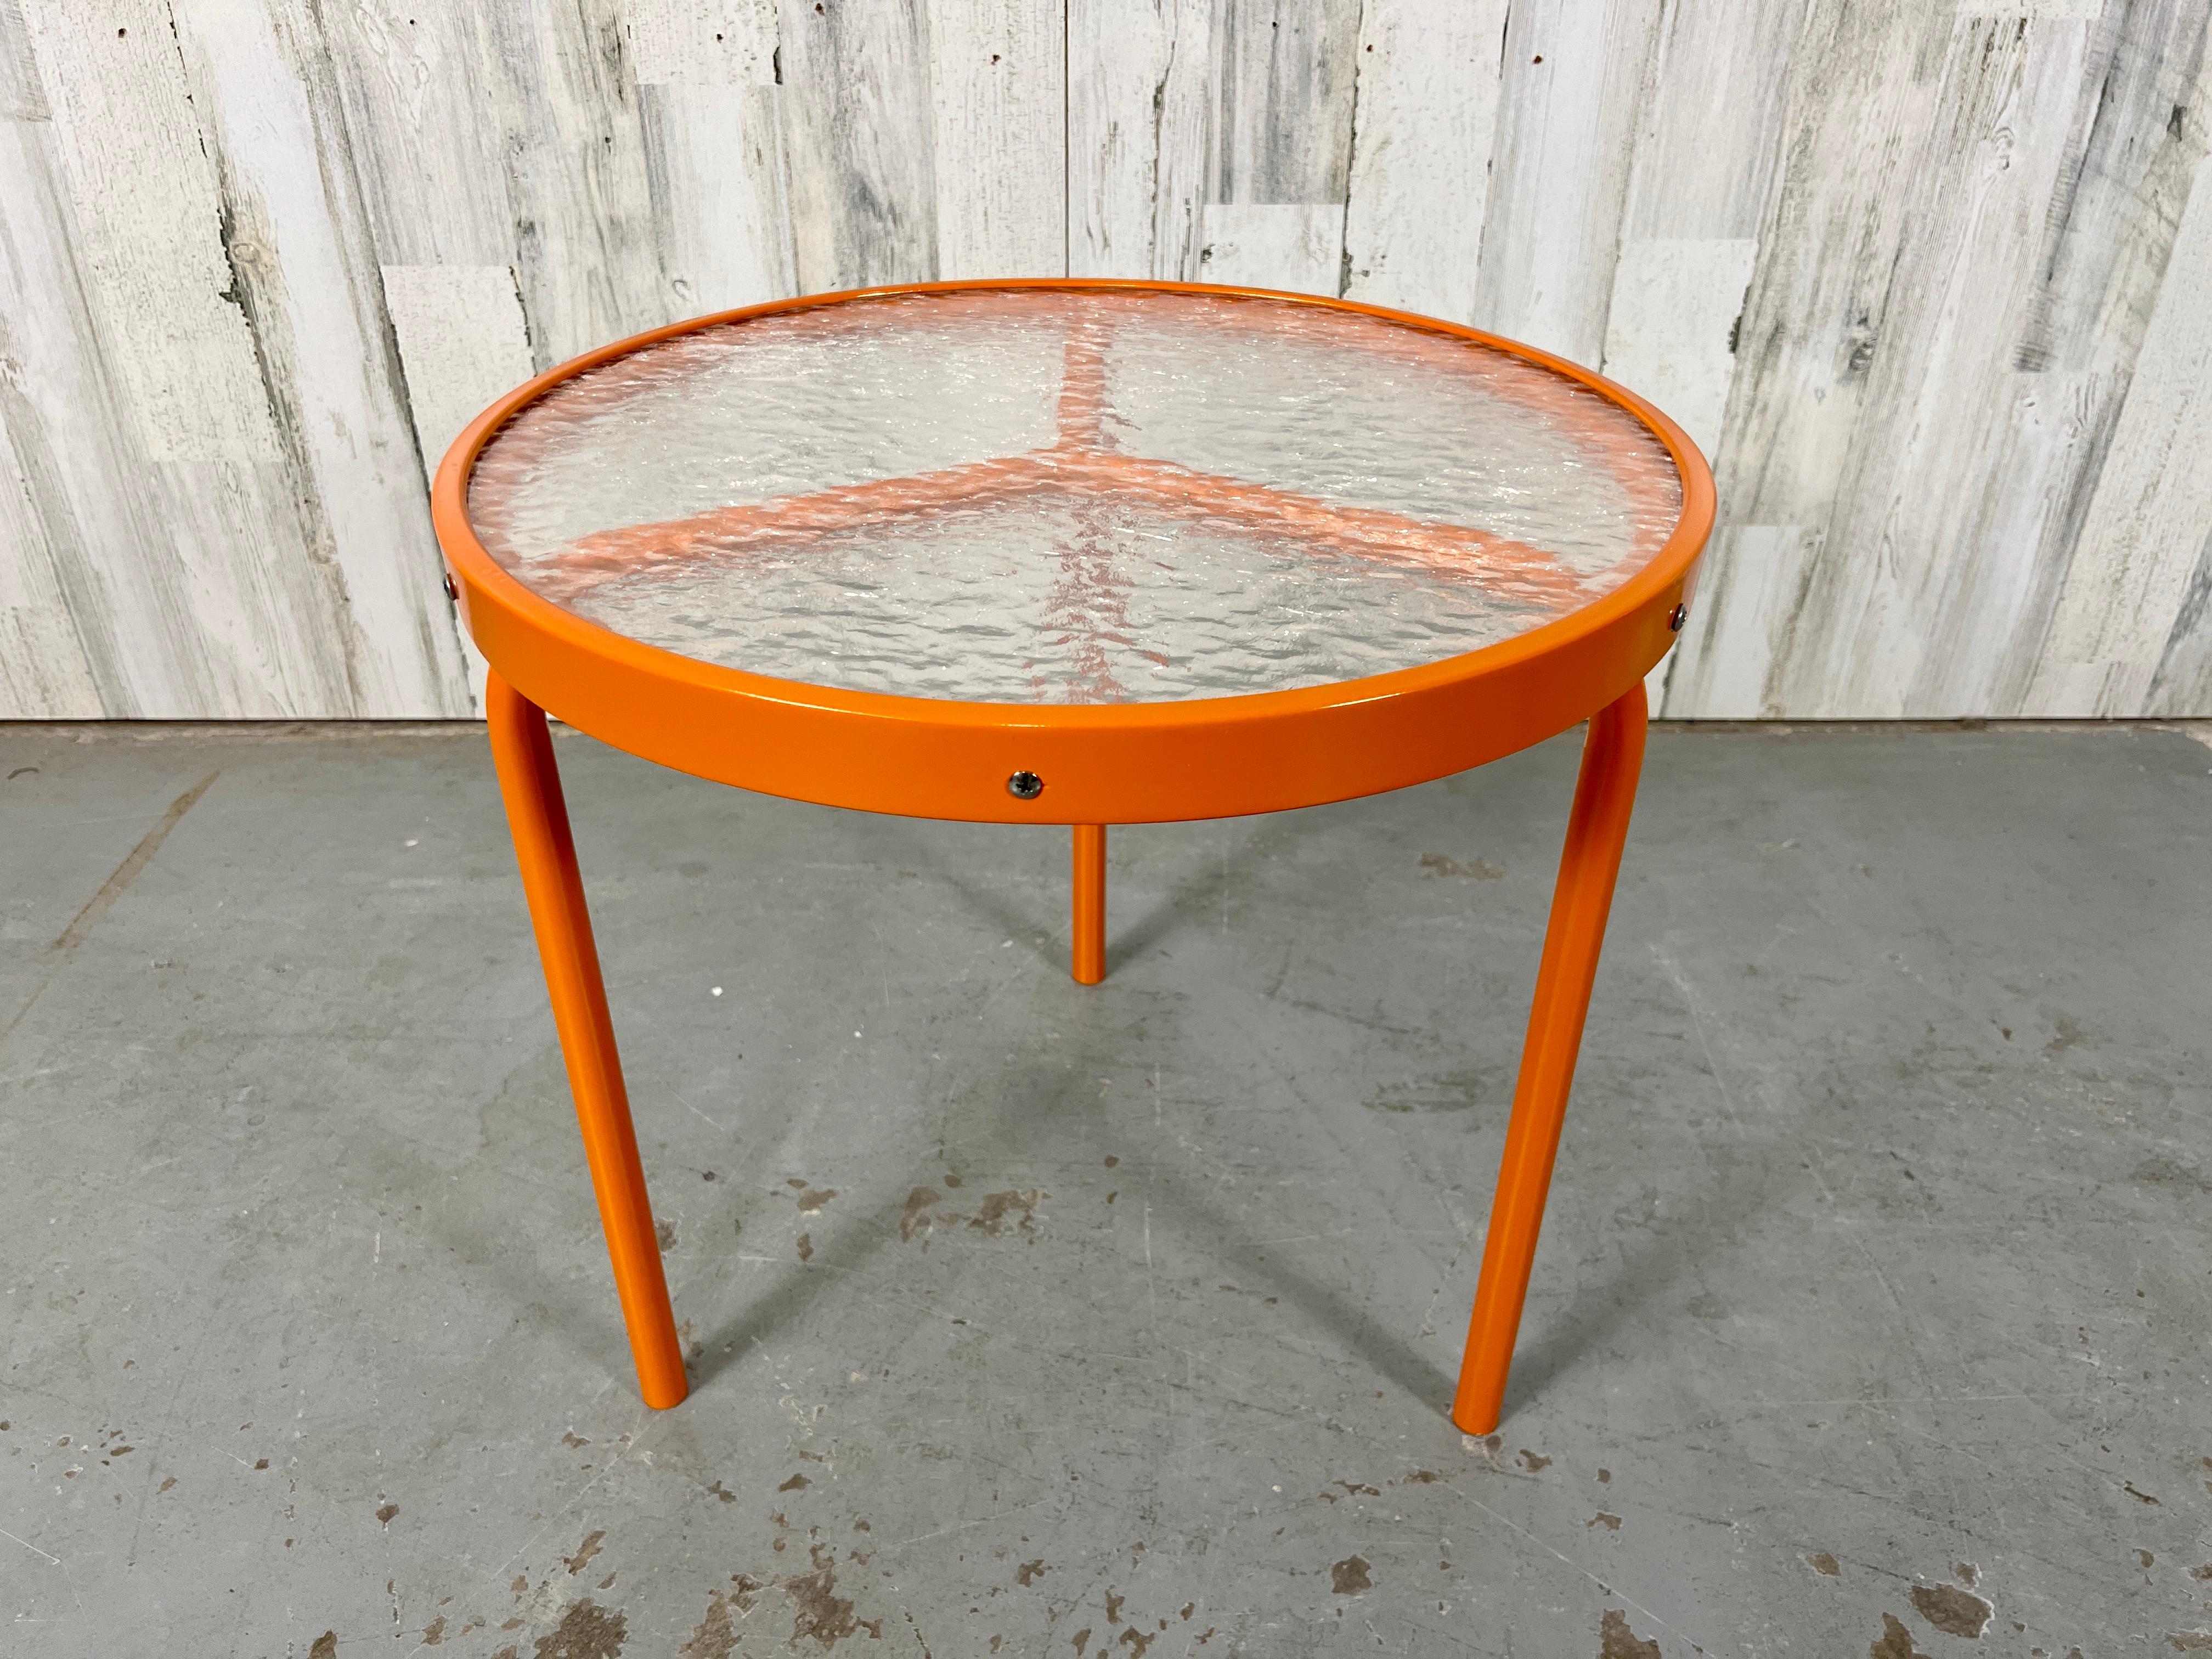 Round three legged side table newly powder coated in citrus orange. This table has the Peace symbol design where the three legs come together. Original pebble acrylic top does show some wear.